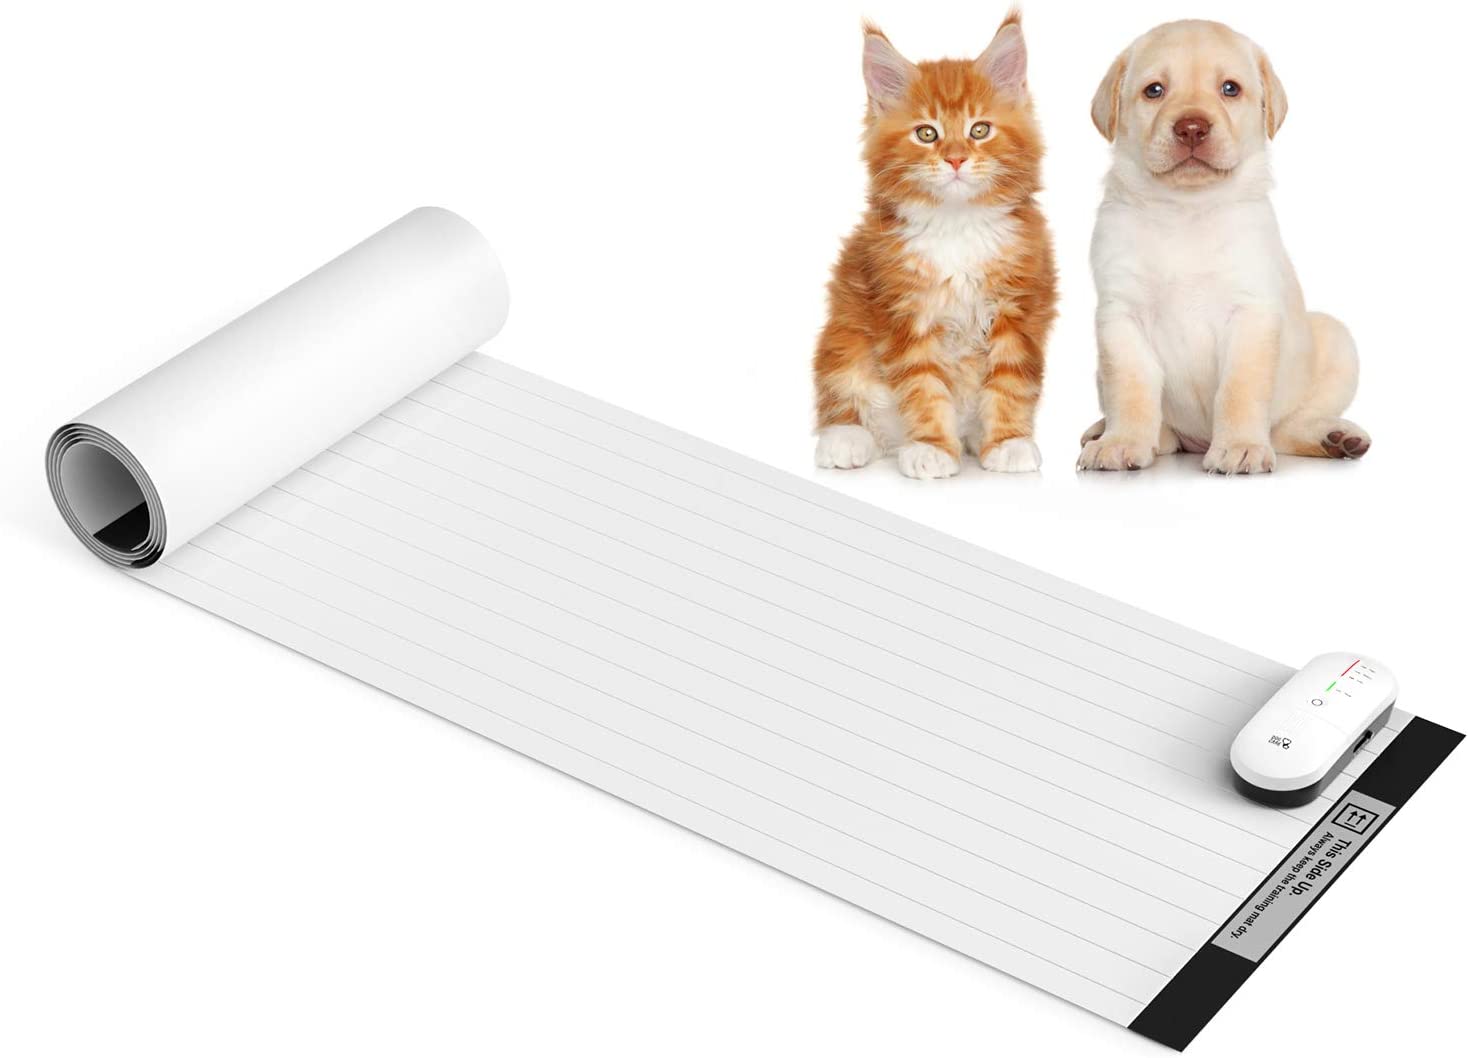 DOG CARE Pet Shock Mat Pet Training Mat for Cats Dogs 60 x 12 Inches, 3 Training Modes Pet Shock Pad Indoor Use, Keep Dogs Off Couch LED Indicator Intelligent Safety Protect